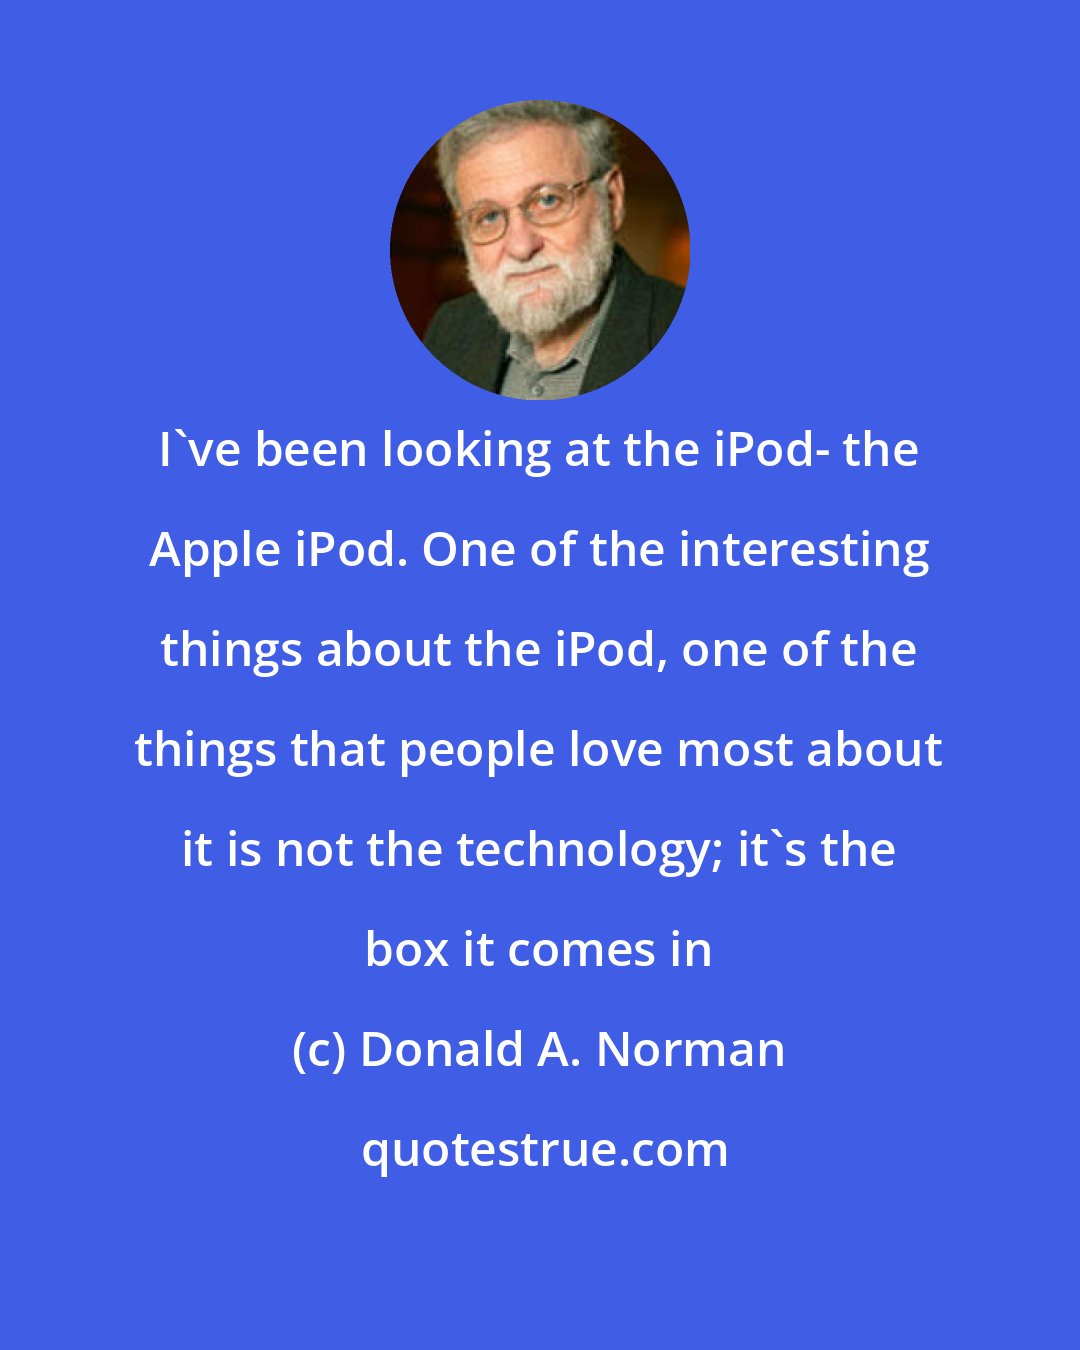 Donald A. Norman: I've been looking at the iPod- the Apple iPod. One of the interesting things about the iPod, one of the things that people love most about it is not the technology; it's the box it comes in